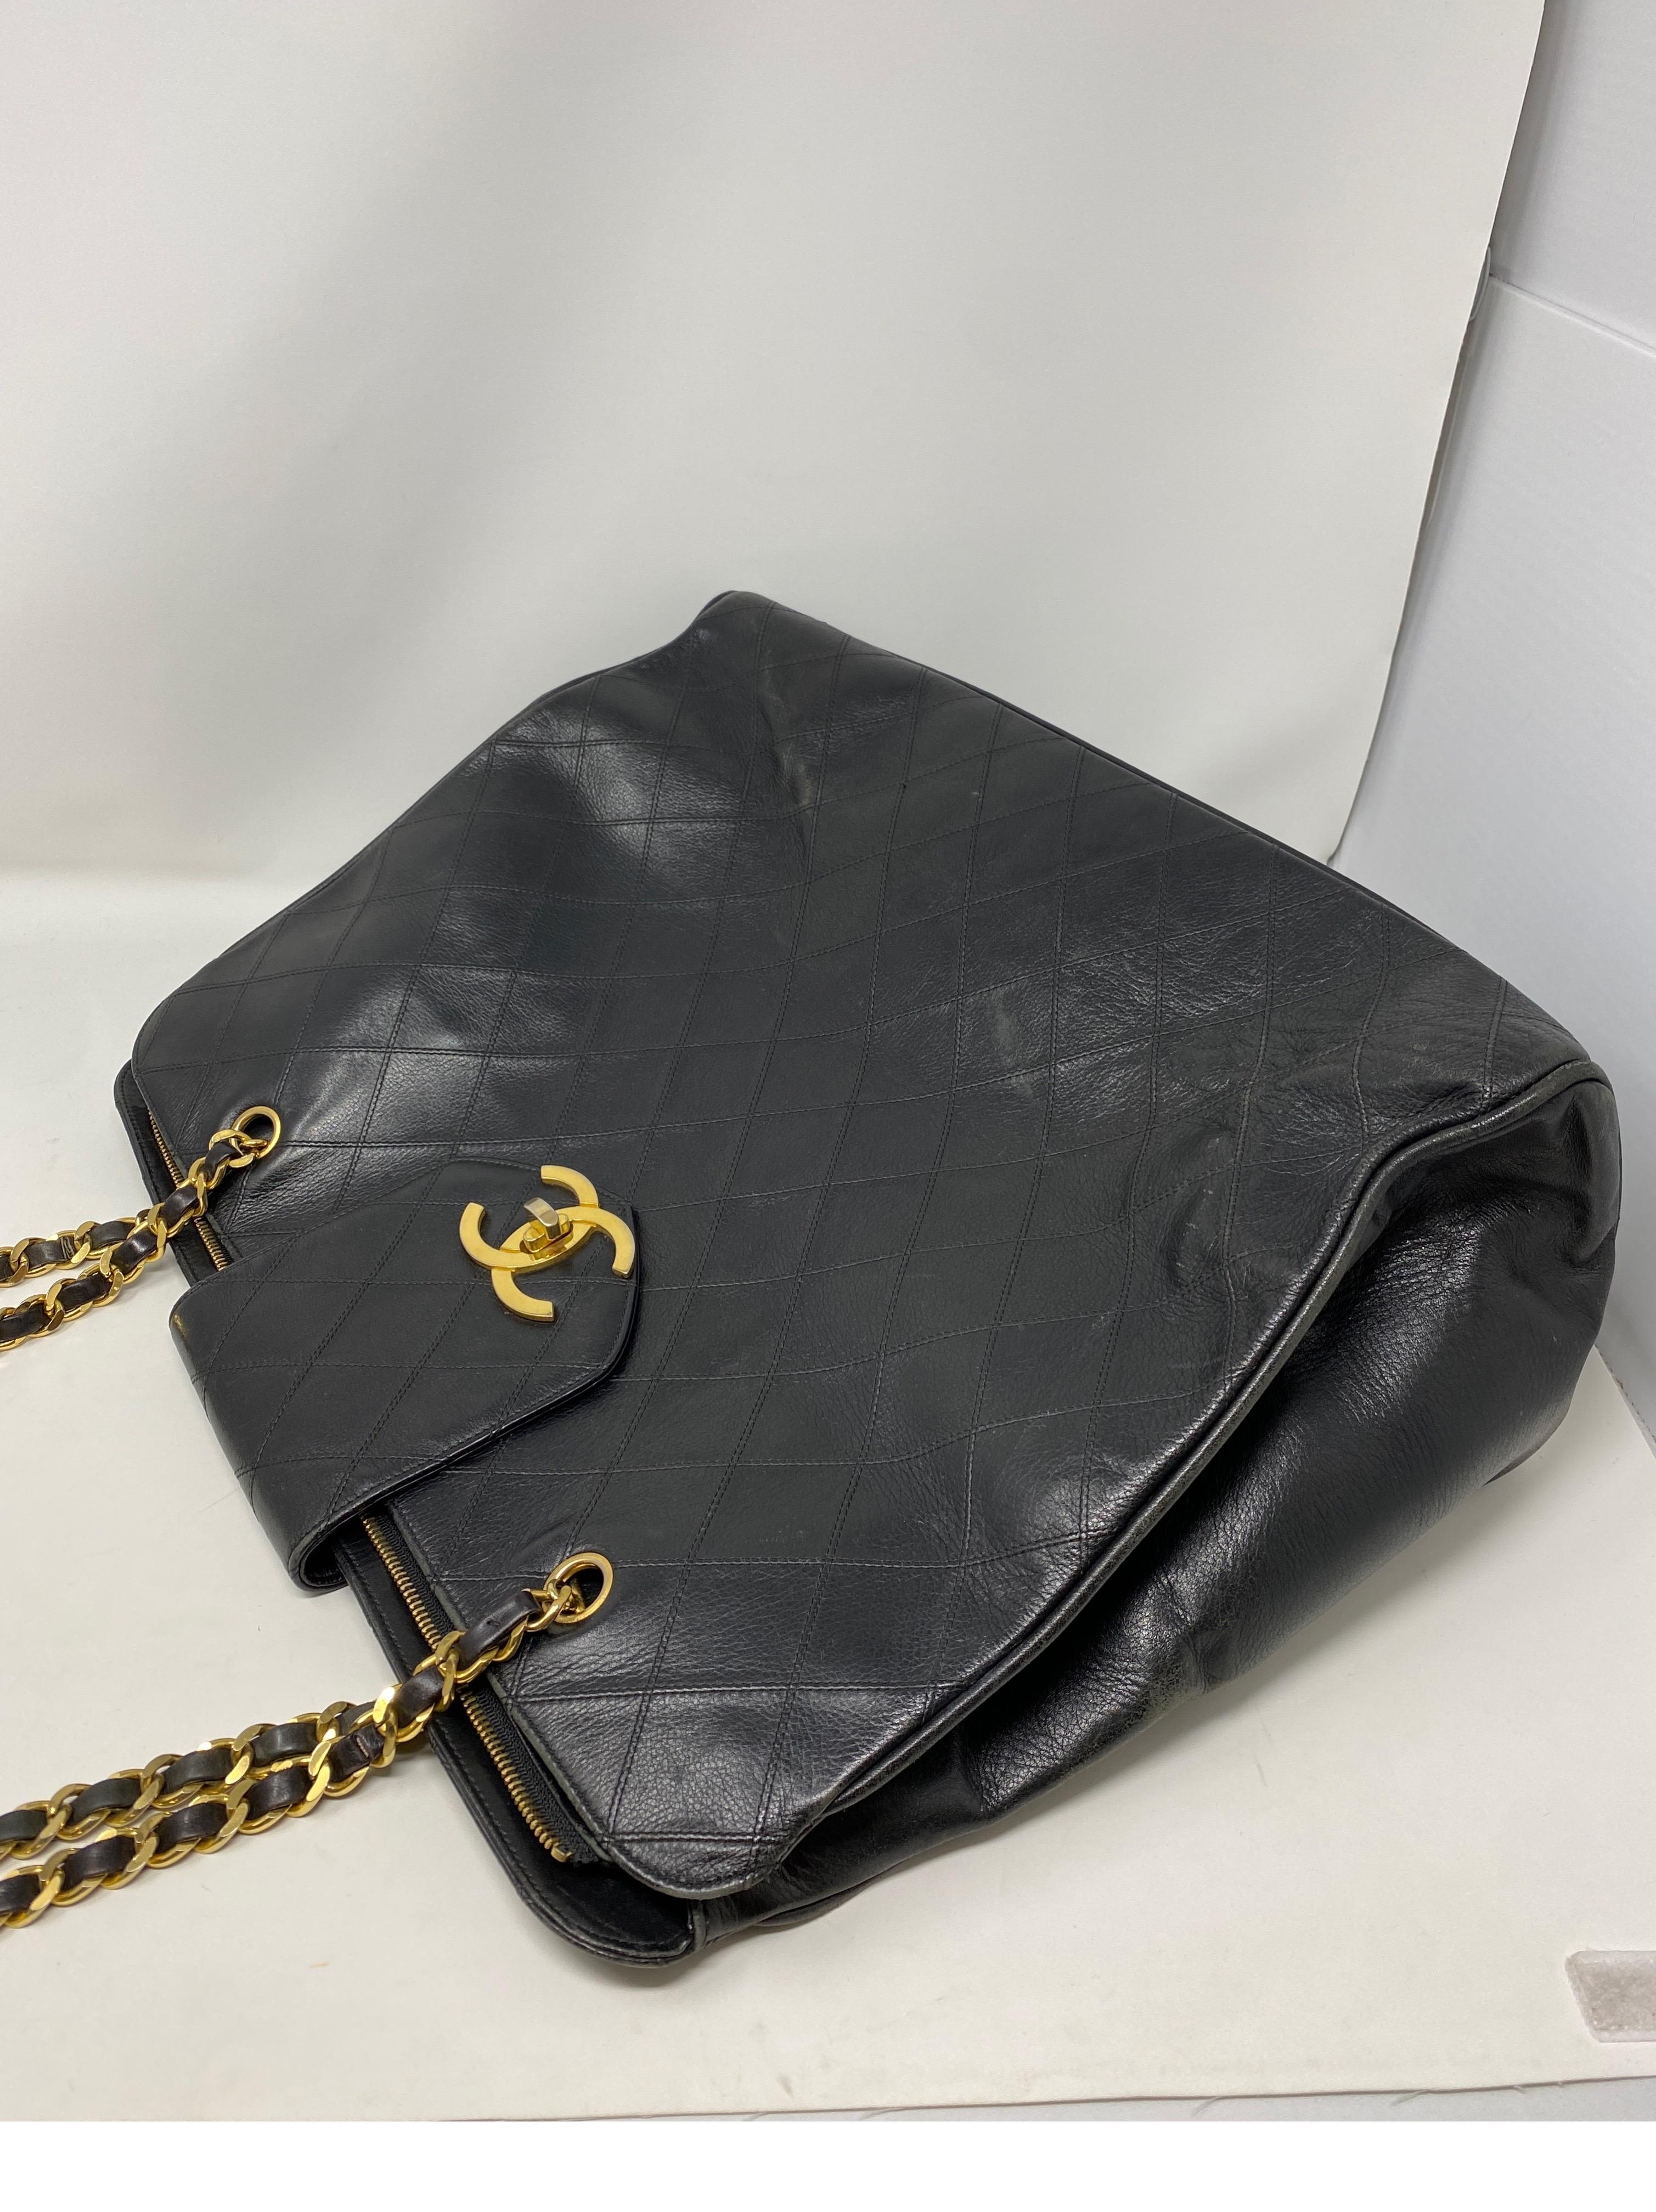 Chanel Super Model Tote Bag. Vintage Chanel with gold hardware. Collector's piece. Gorgeous leather bag. Iconic style by the house of Chanel. A celebrity favorite. Add this to your vintage collection. Serial number is inside the bag. Guaranteed